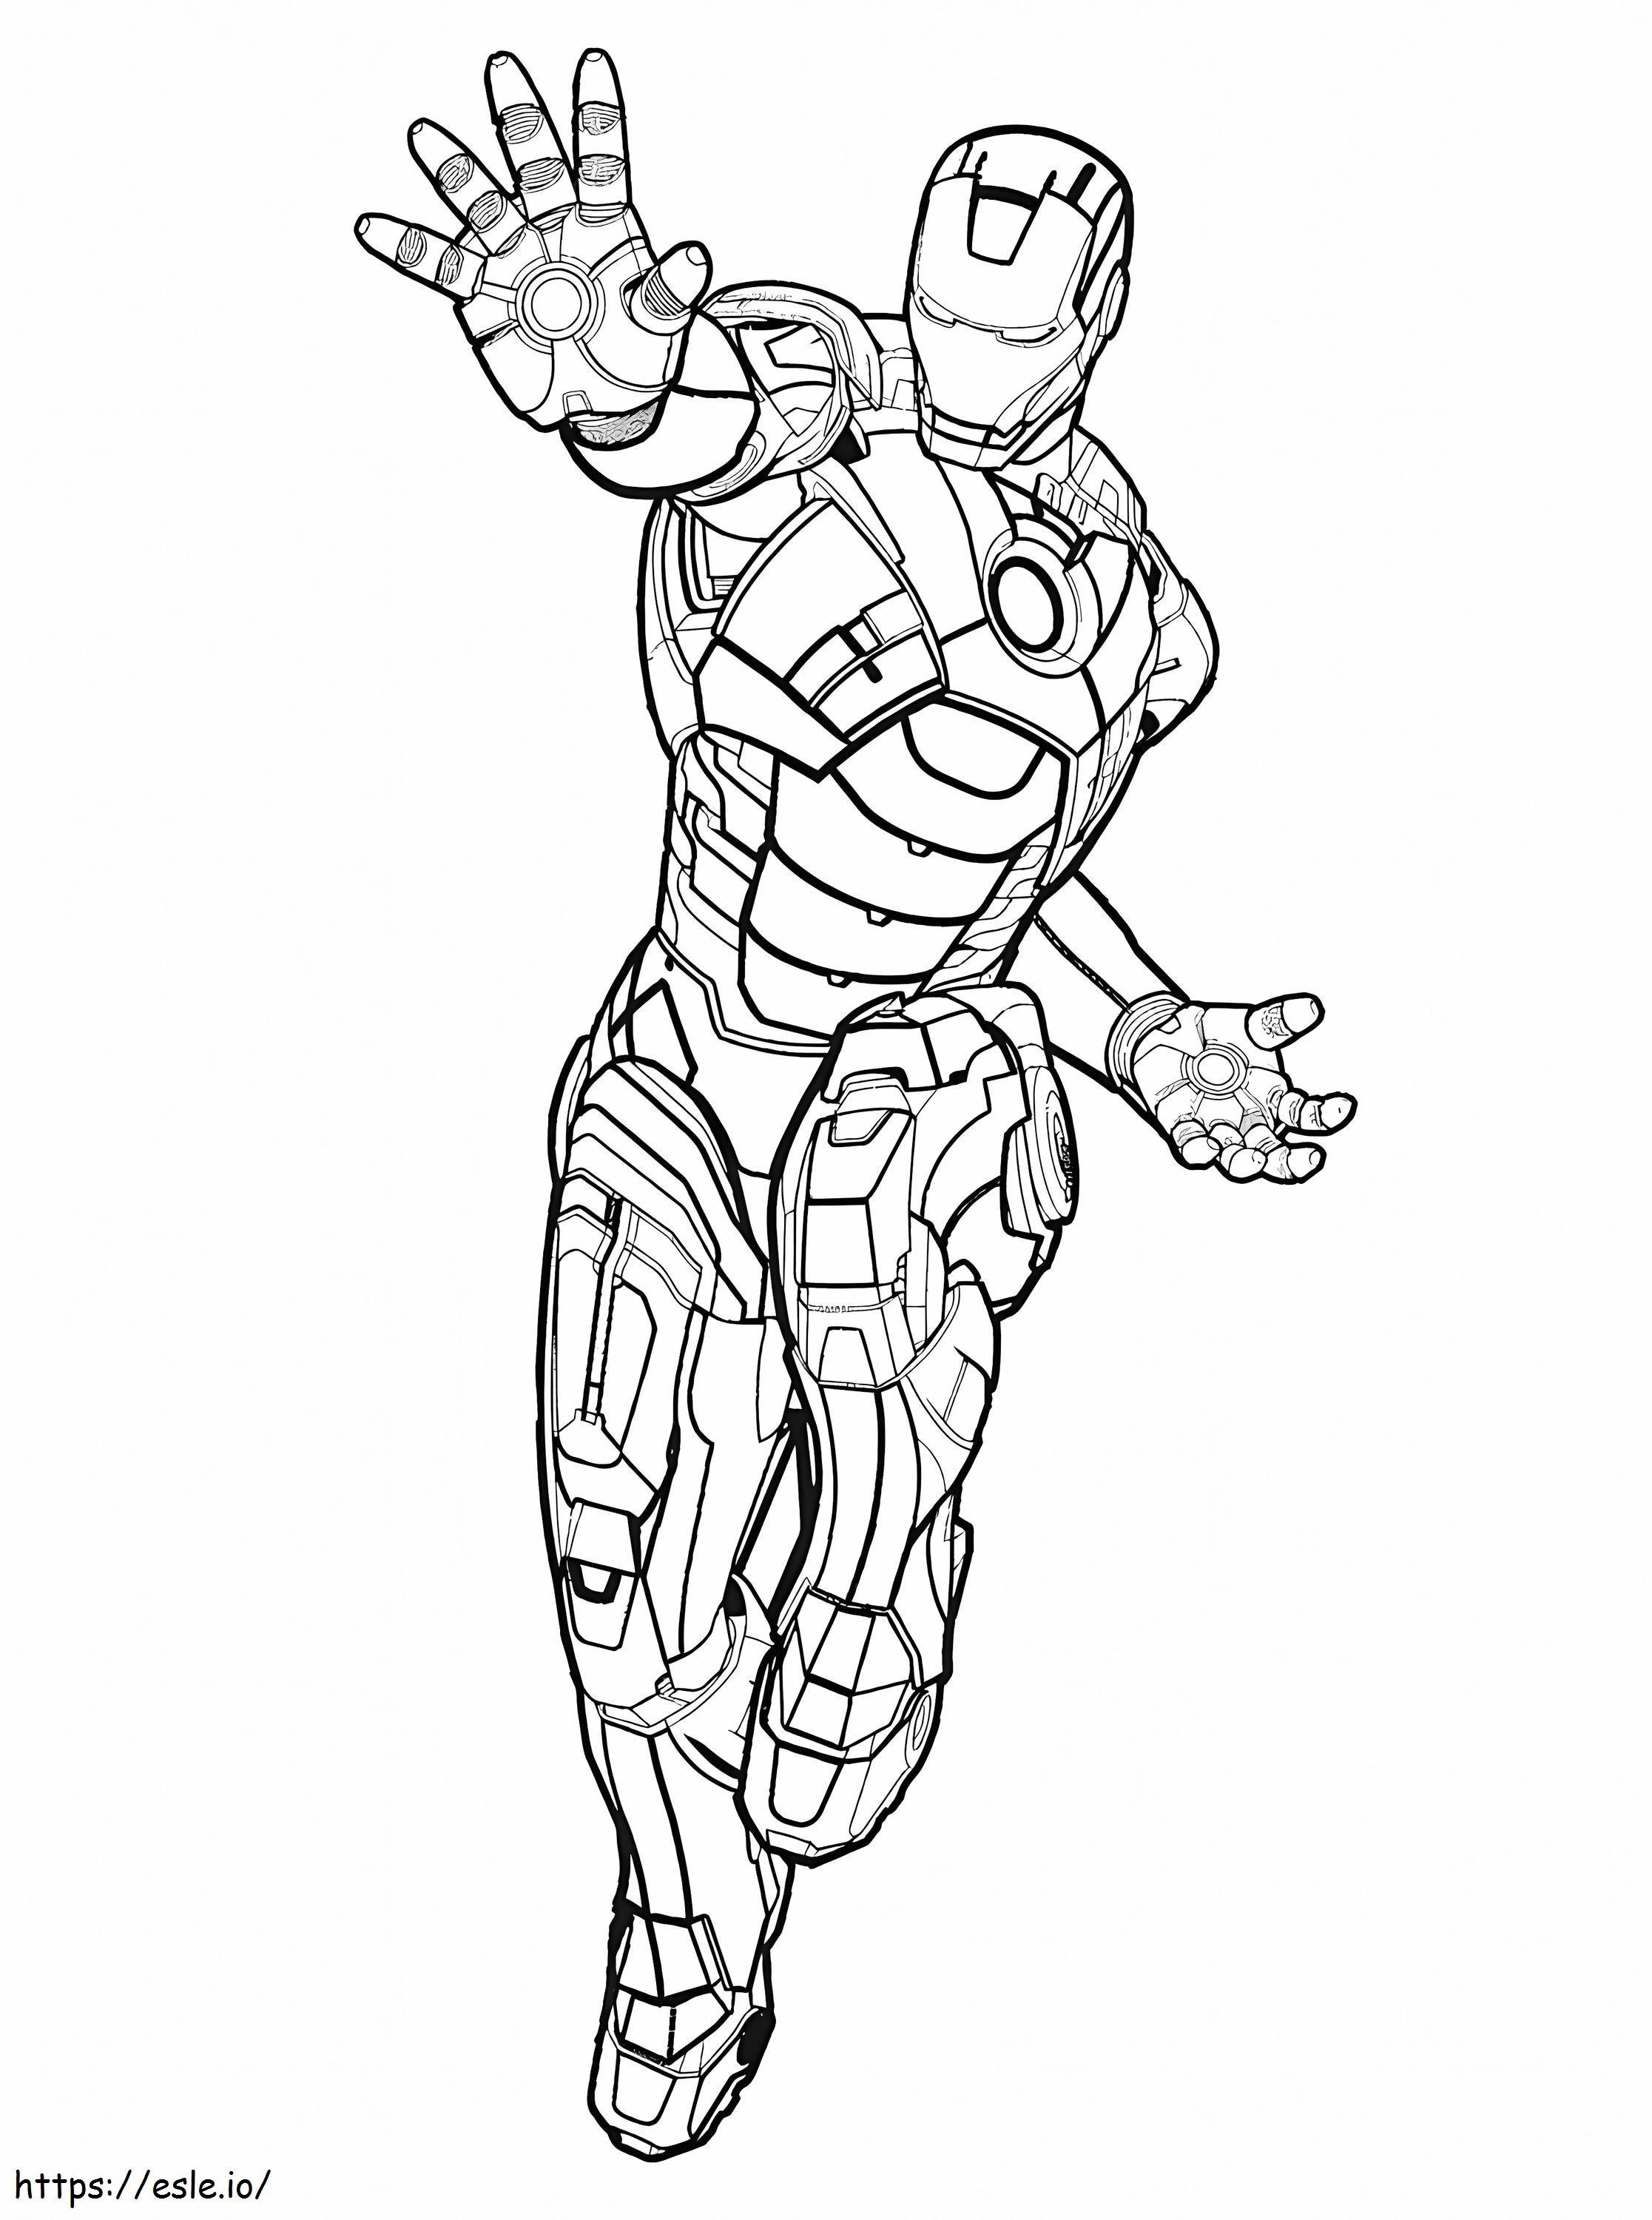 Amazing Iron Man coloring page